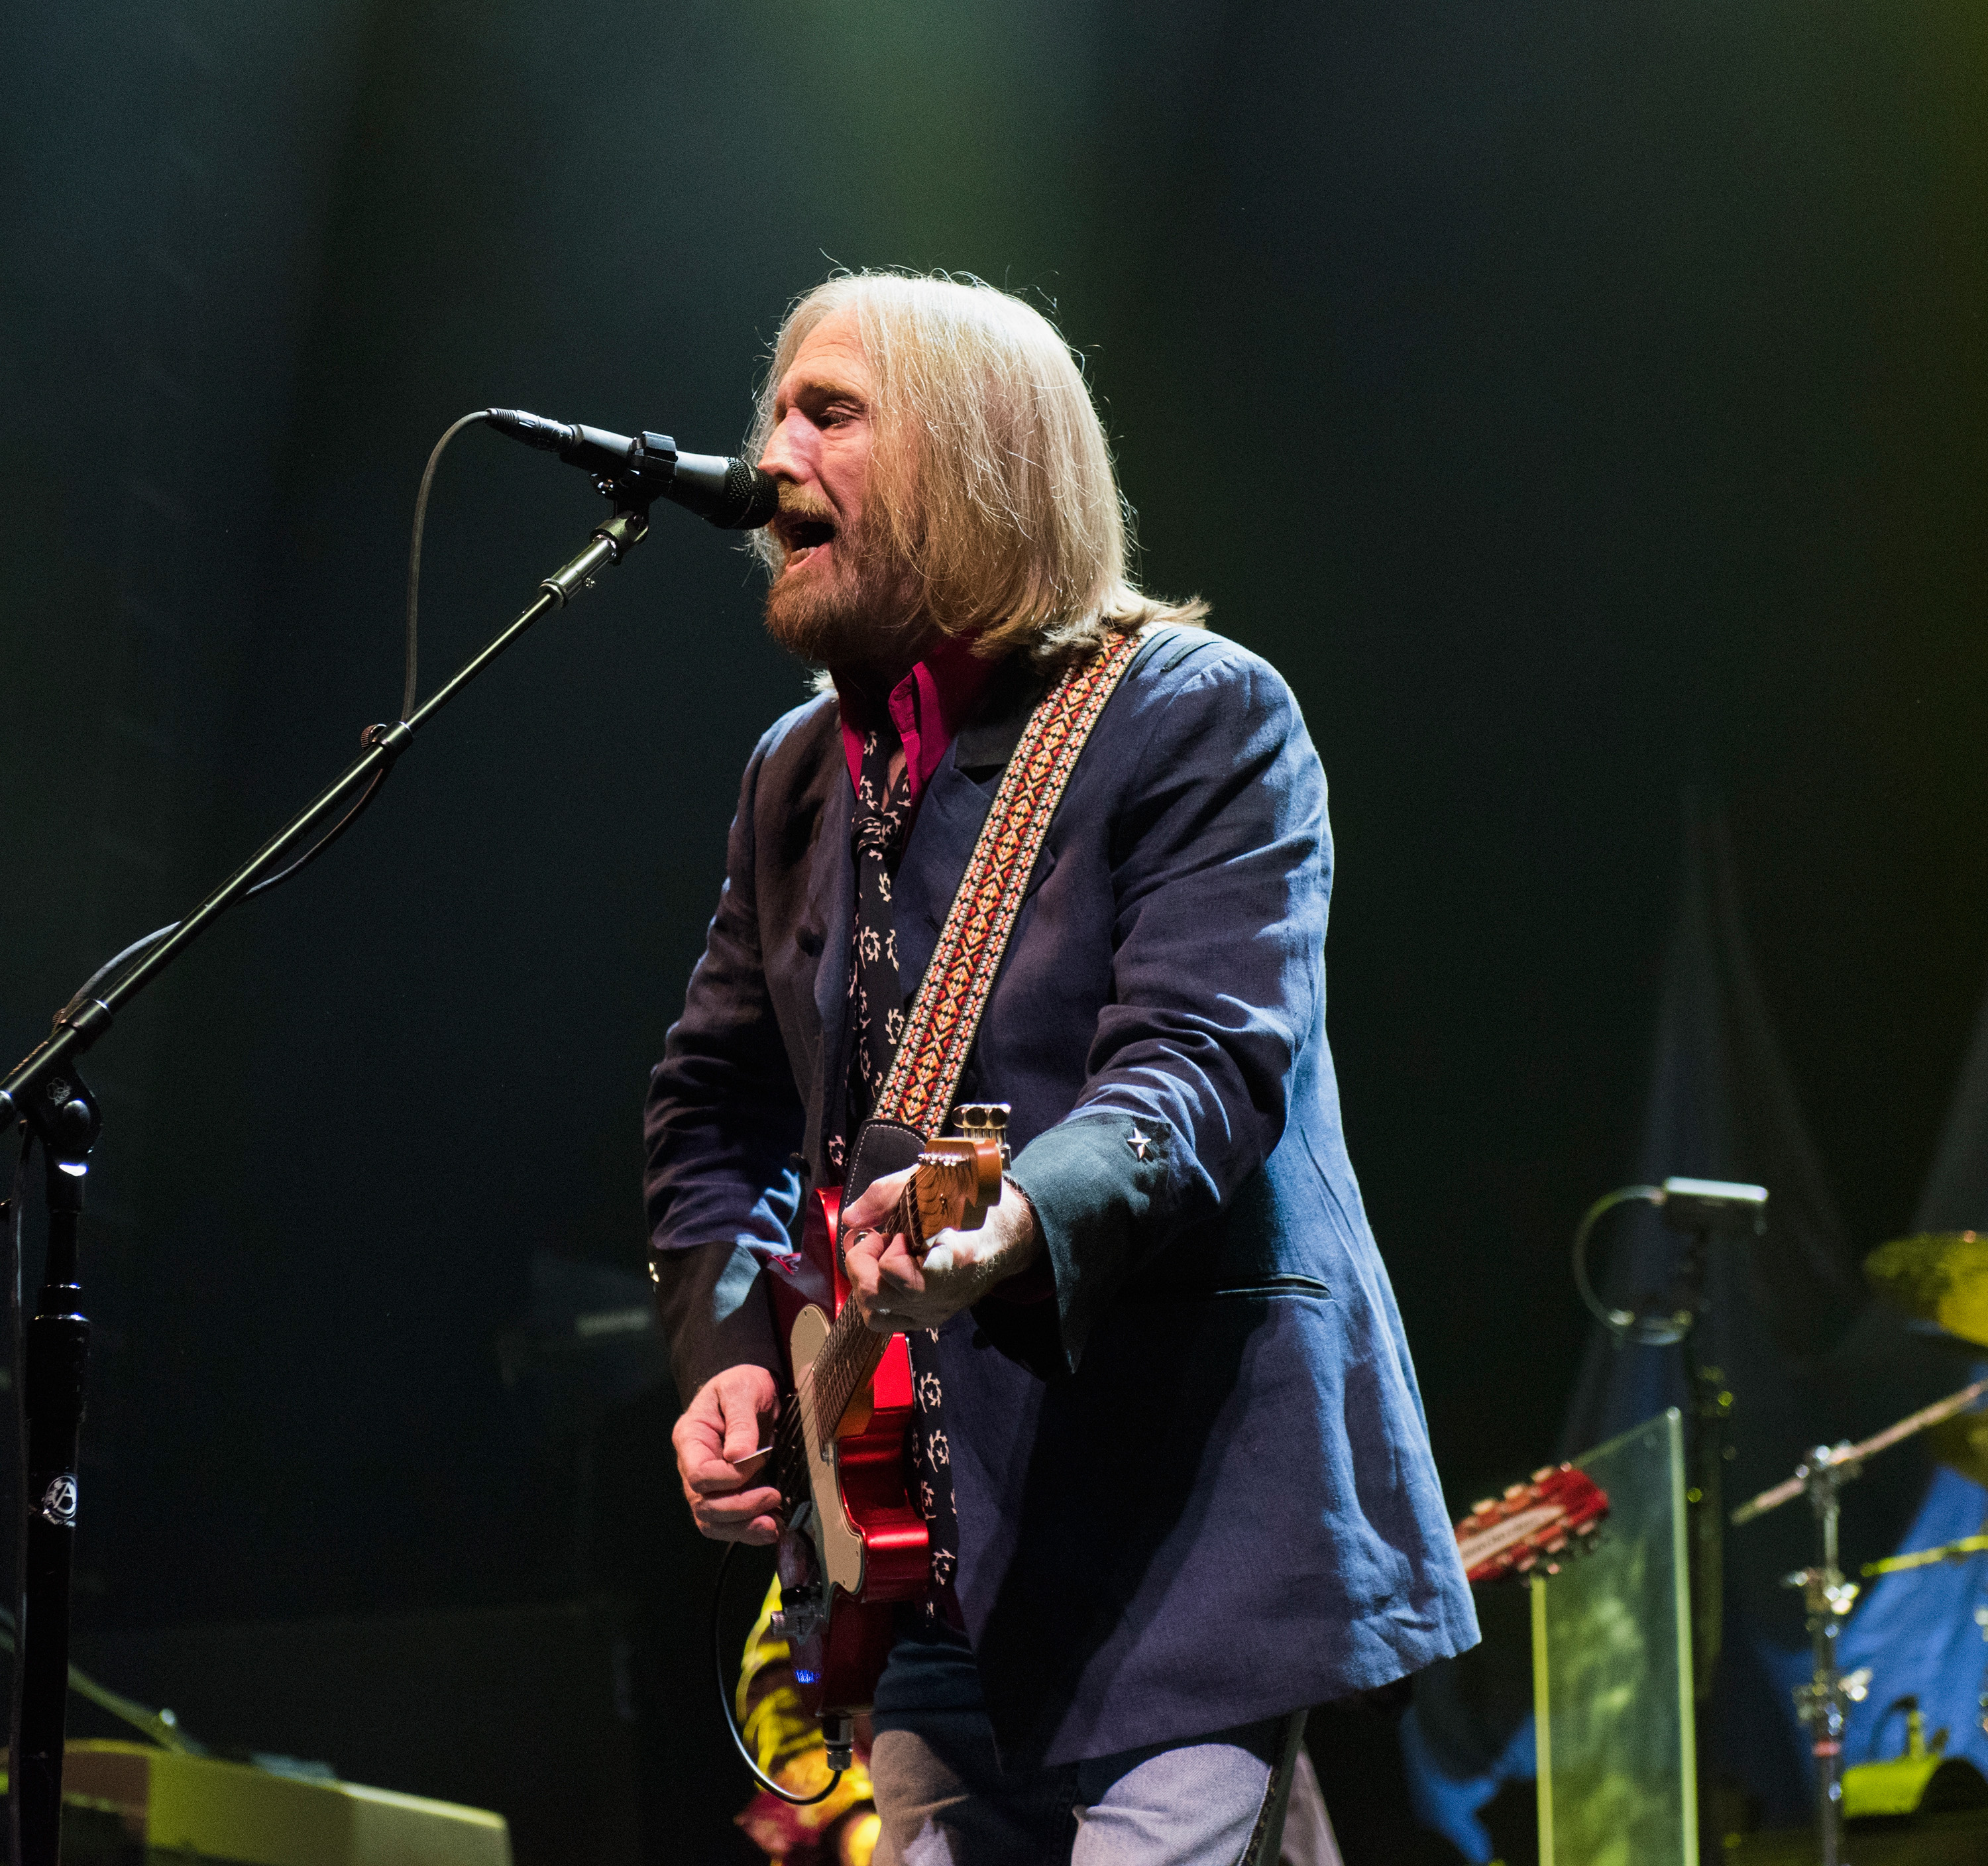 Tom Petty of Tom Petty And The Heartbreakers performs onstage at The Forum on October 10, 2014 in Inglewood, California. (Paul R. Giunta—Getty Images)